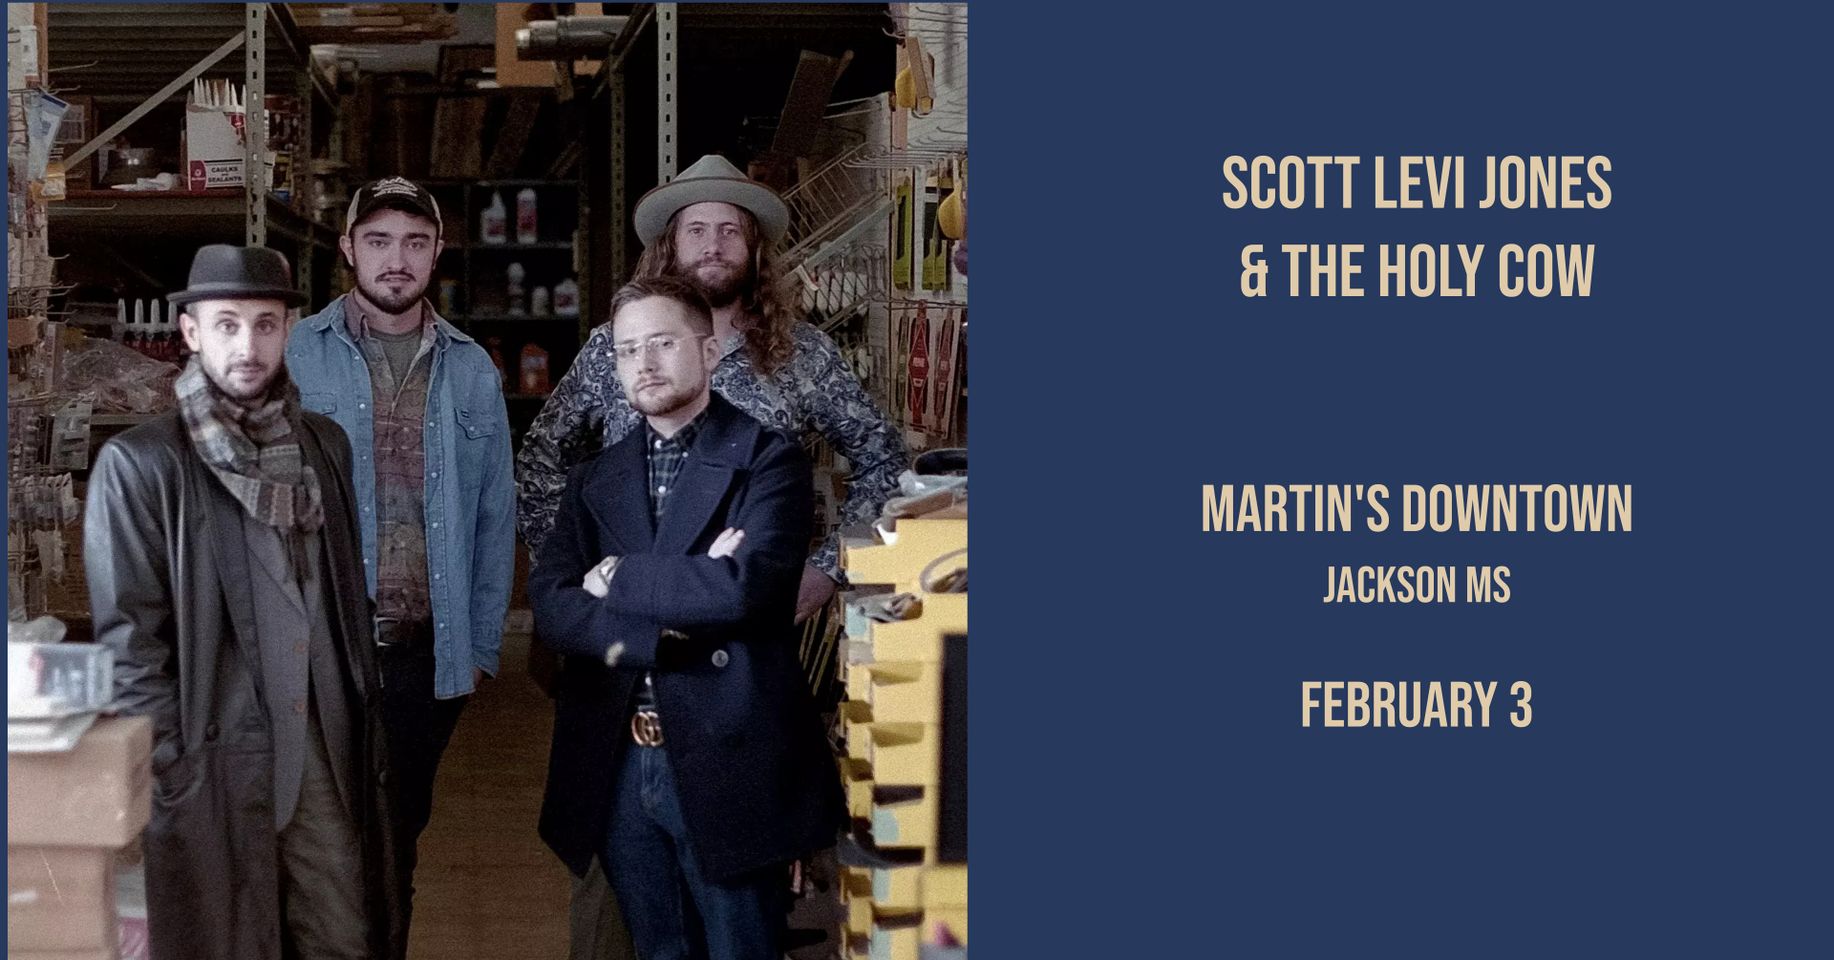 Scott Levi Jones & The Holy Cow Live at Martin’s Downtown